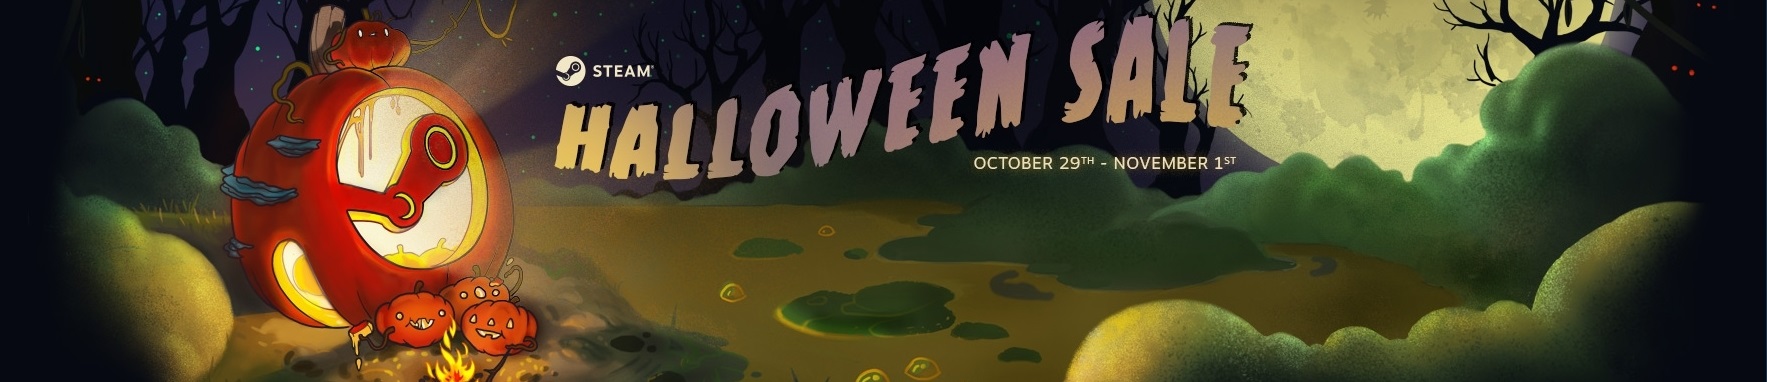 The annual spooky Steam sales have started just in time for Halloween